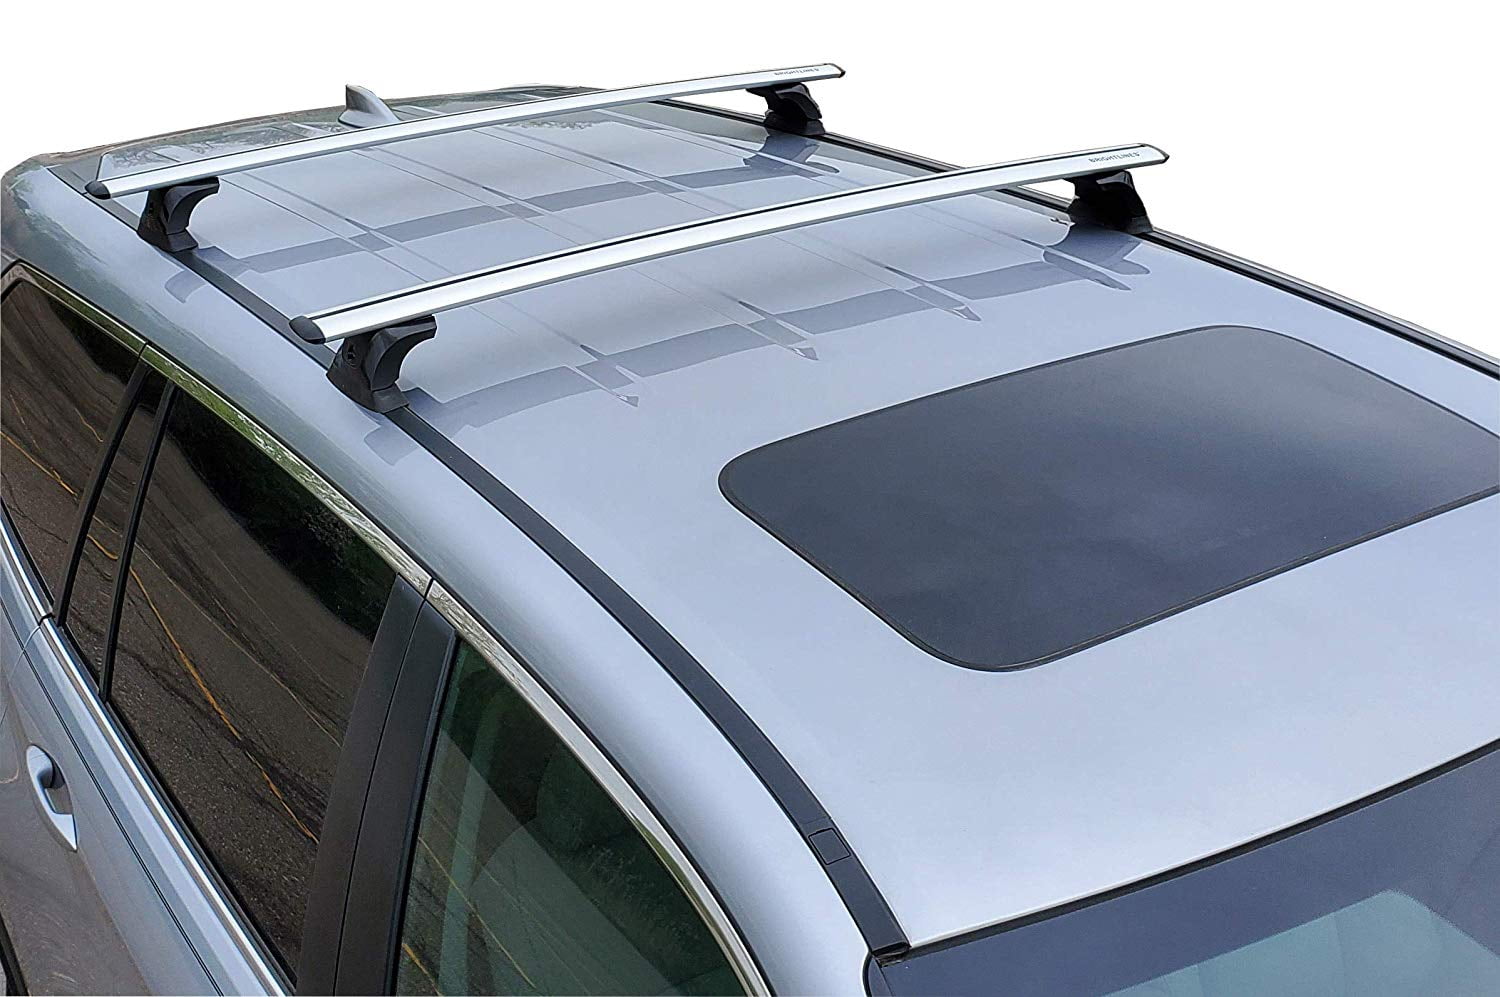 A Pair Silvery Aluminum alloy Roof Rack Cross Bar Set For Chevrolet